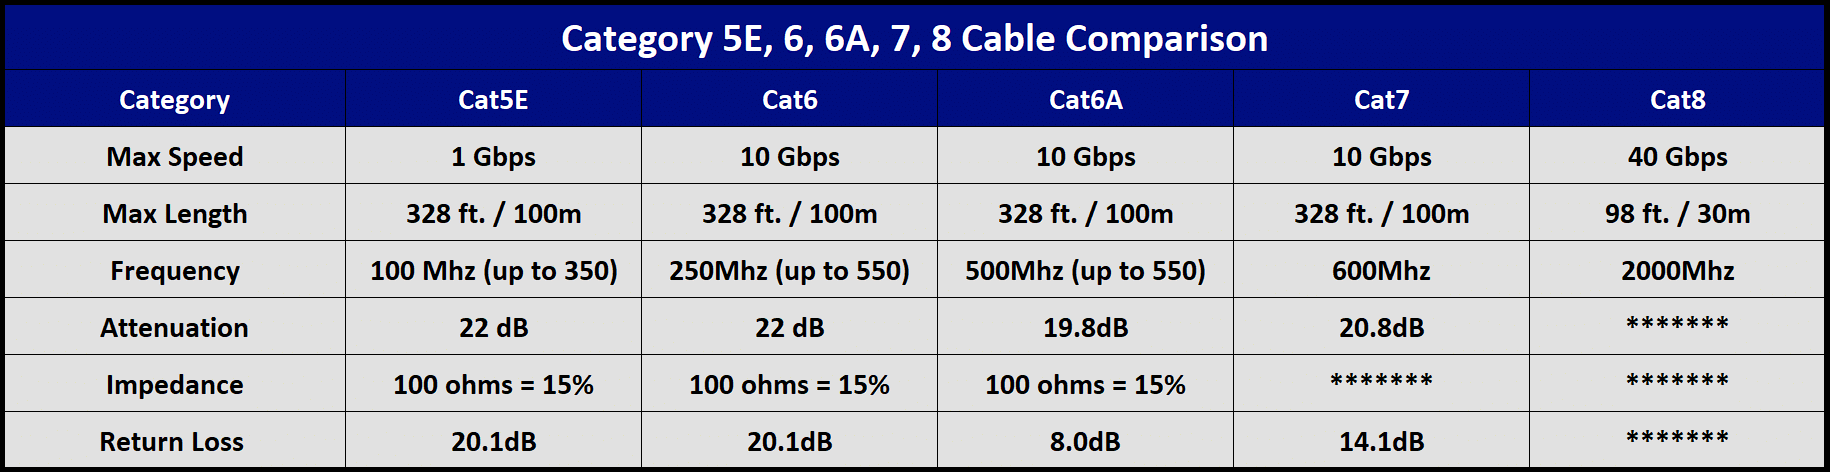 Category Comparison, Network Rack, Structured Cabling Products, Structured Cabling Design, Cat5E, Cat6, Cat6A, Fiber Optic Cable, Coaxial Cable, Structured Cabling, Cabling, Network Cabling, Data, Data Wire, Structured Wiring System, Cat6, Tel-Data Communications